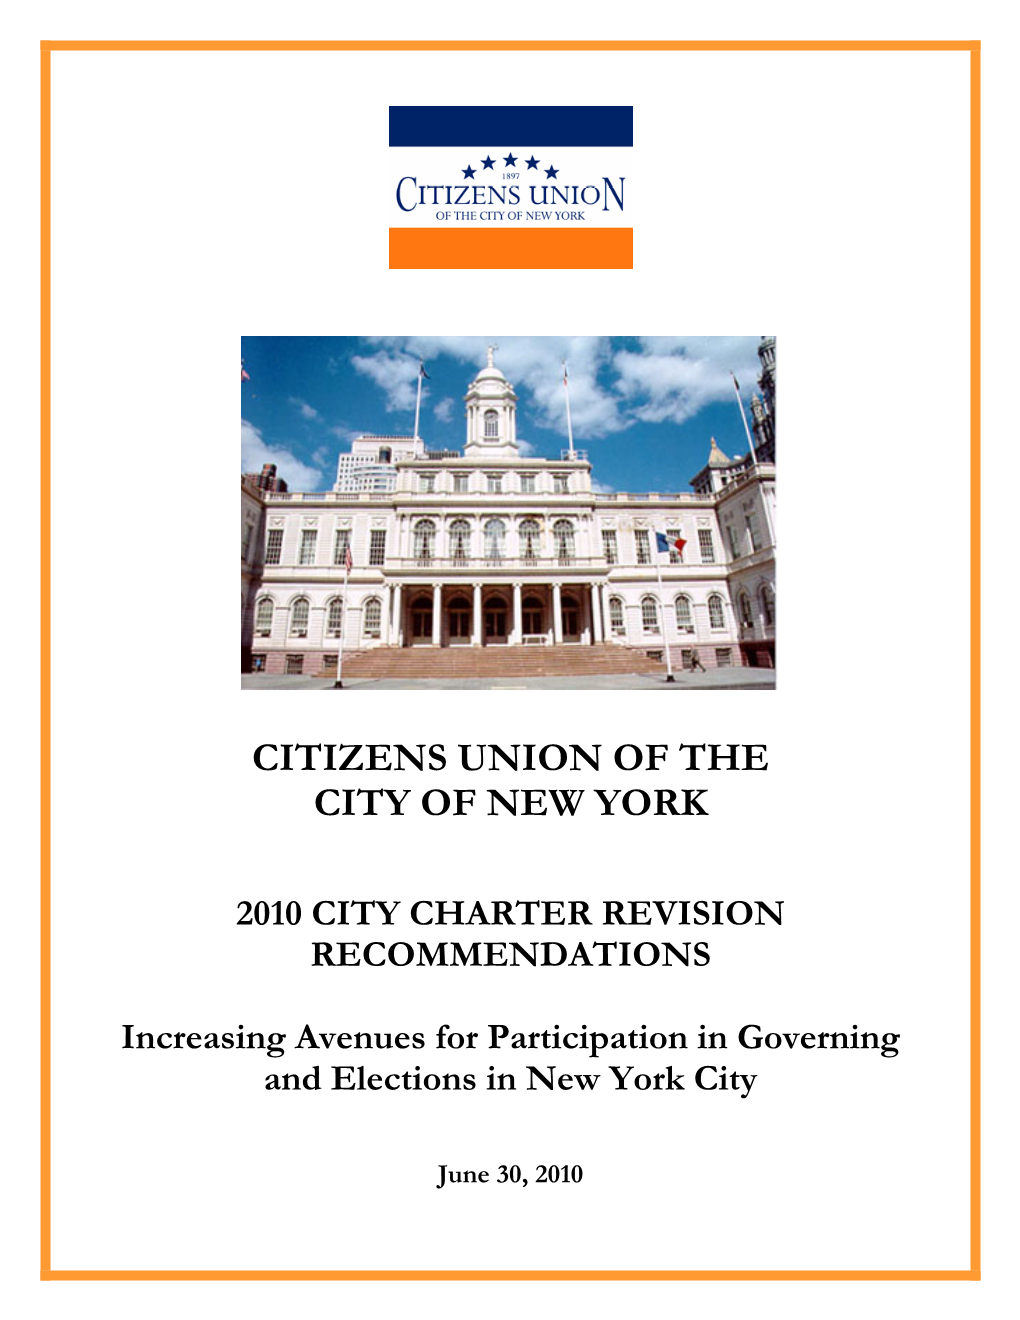 Report for City Charter Revision